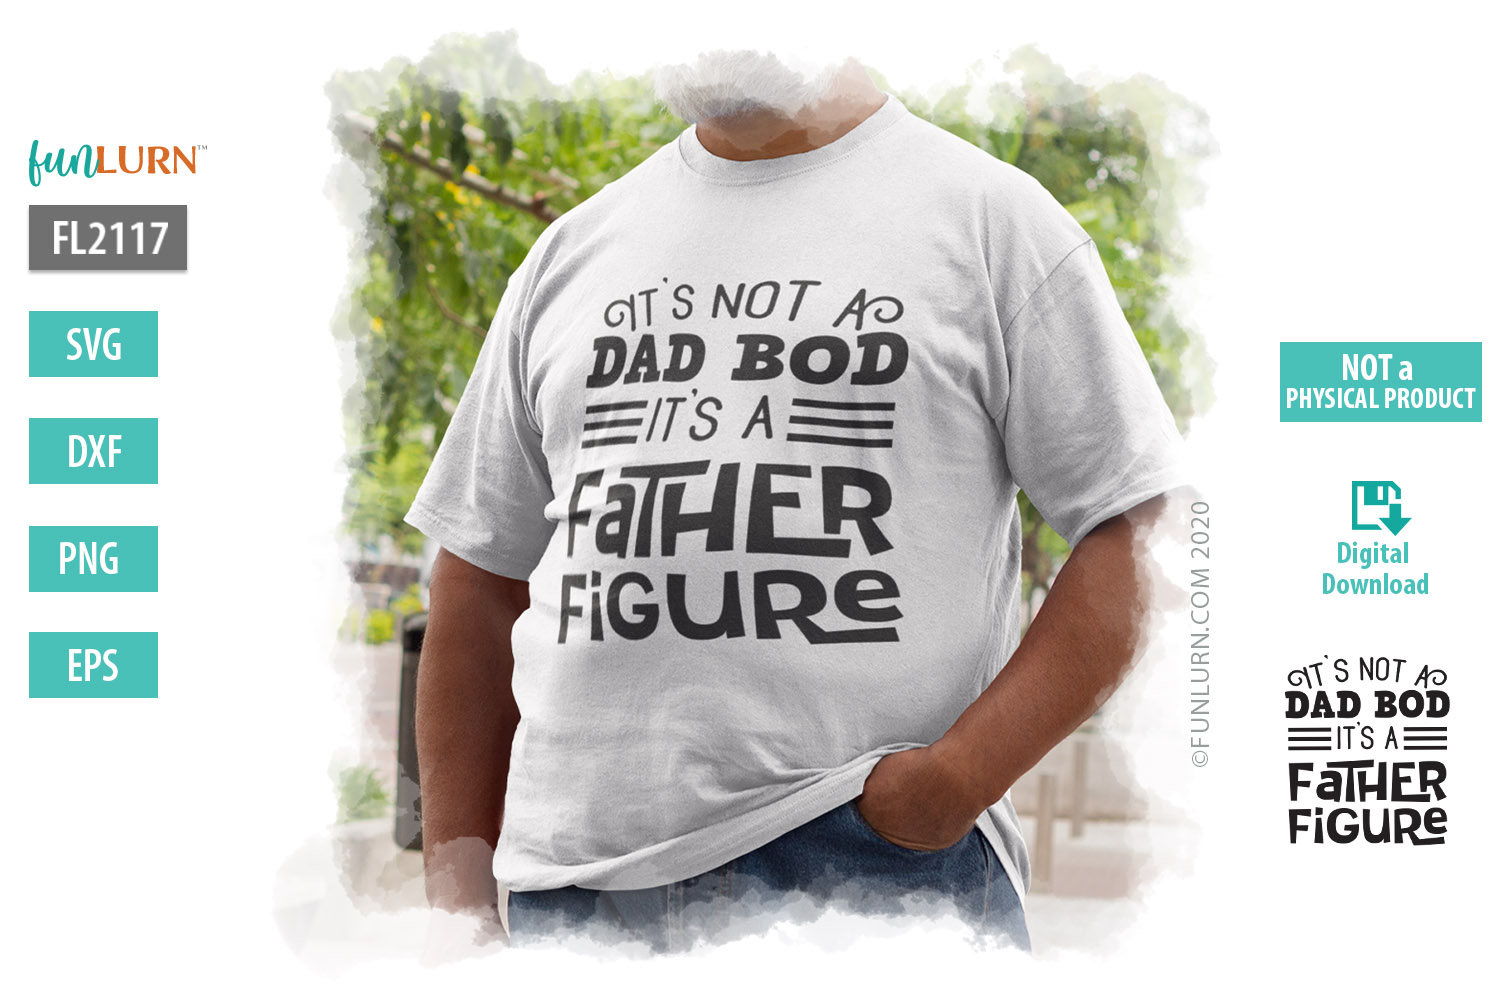 Download It S Not A Dad Bod Its A Father Figure Svg Funlurn